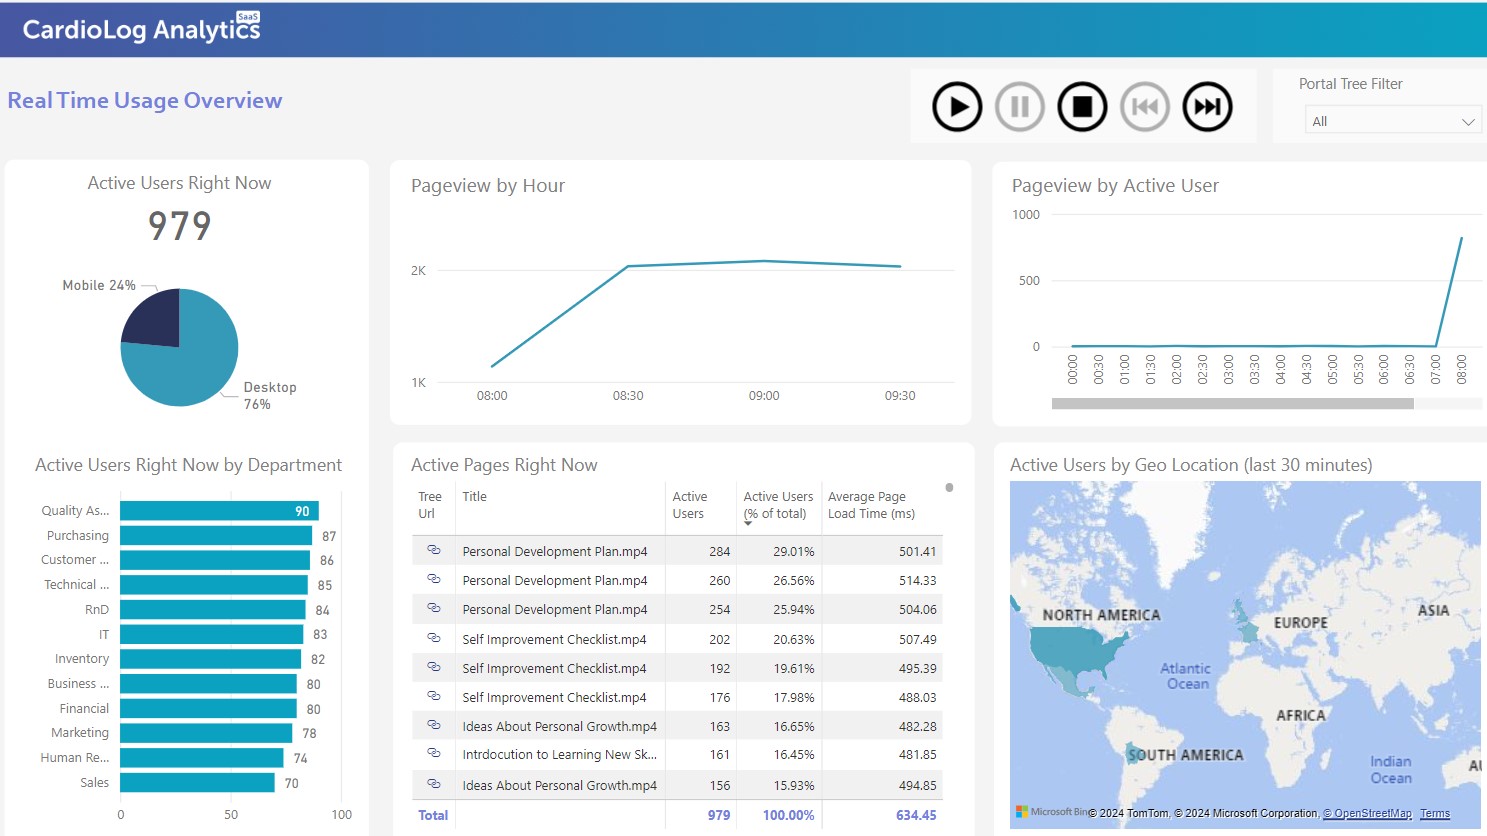 SharePoint with Advanced Usage Analytics example